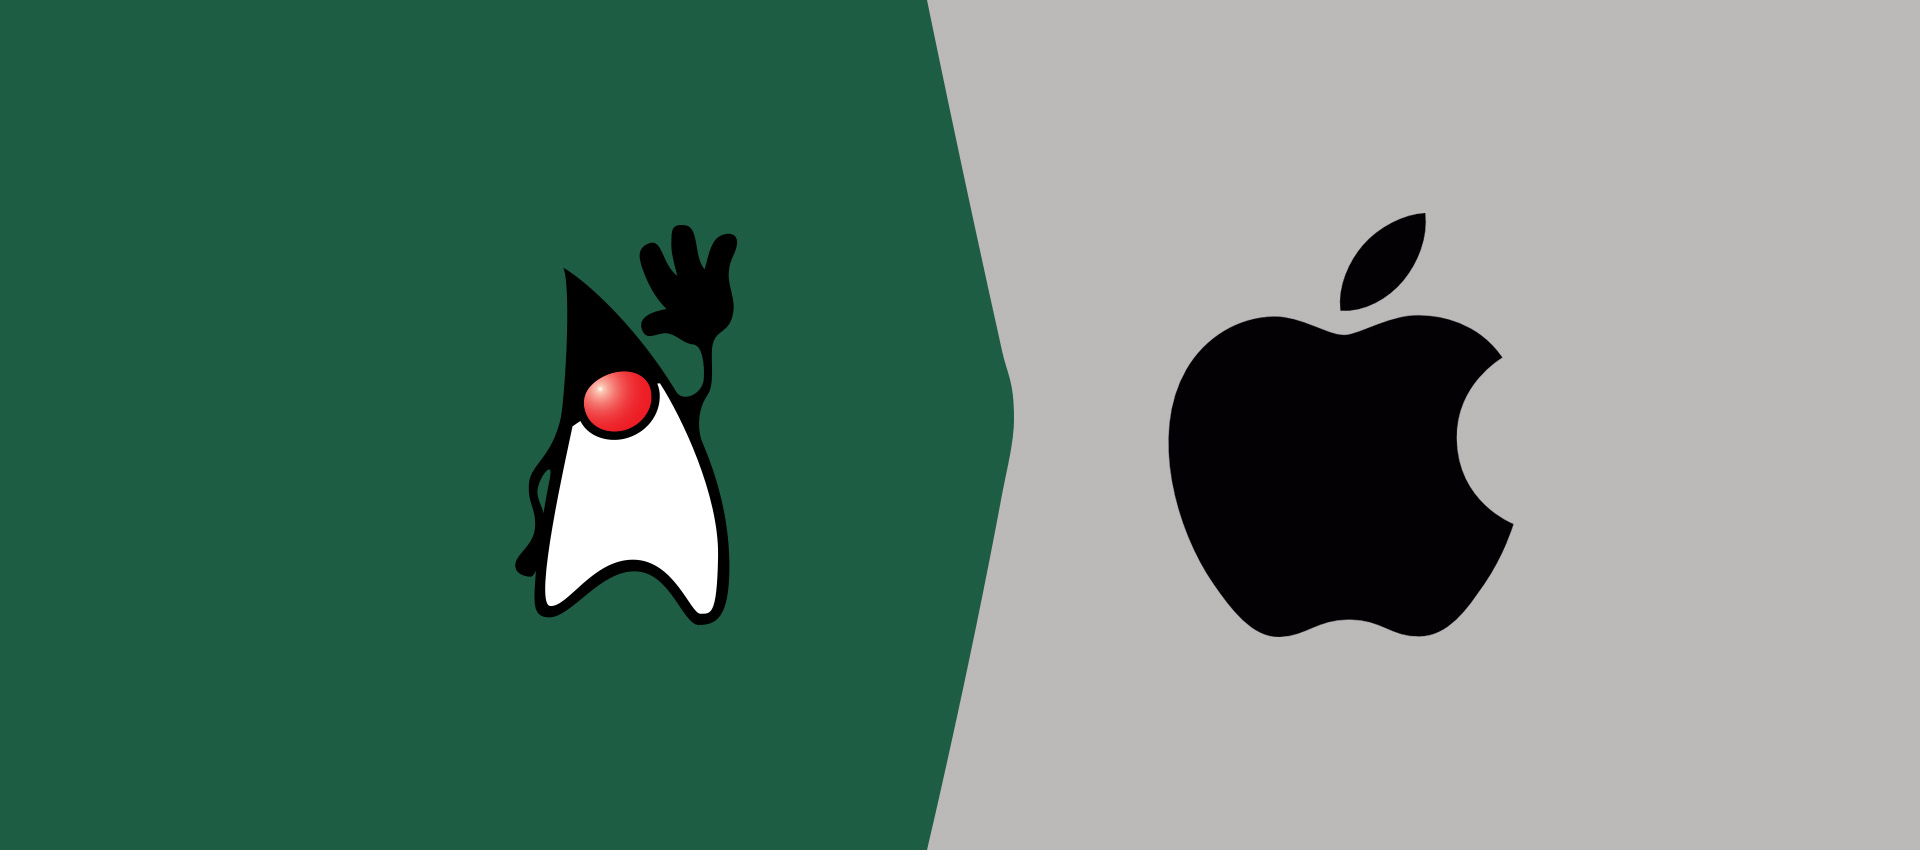 How To Install OpenJDK 17 On Mac